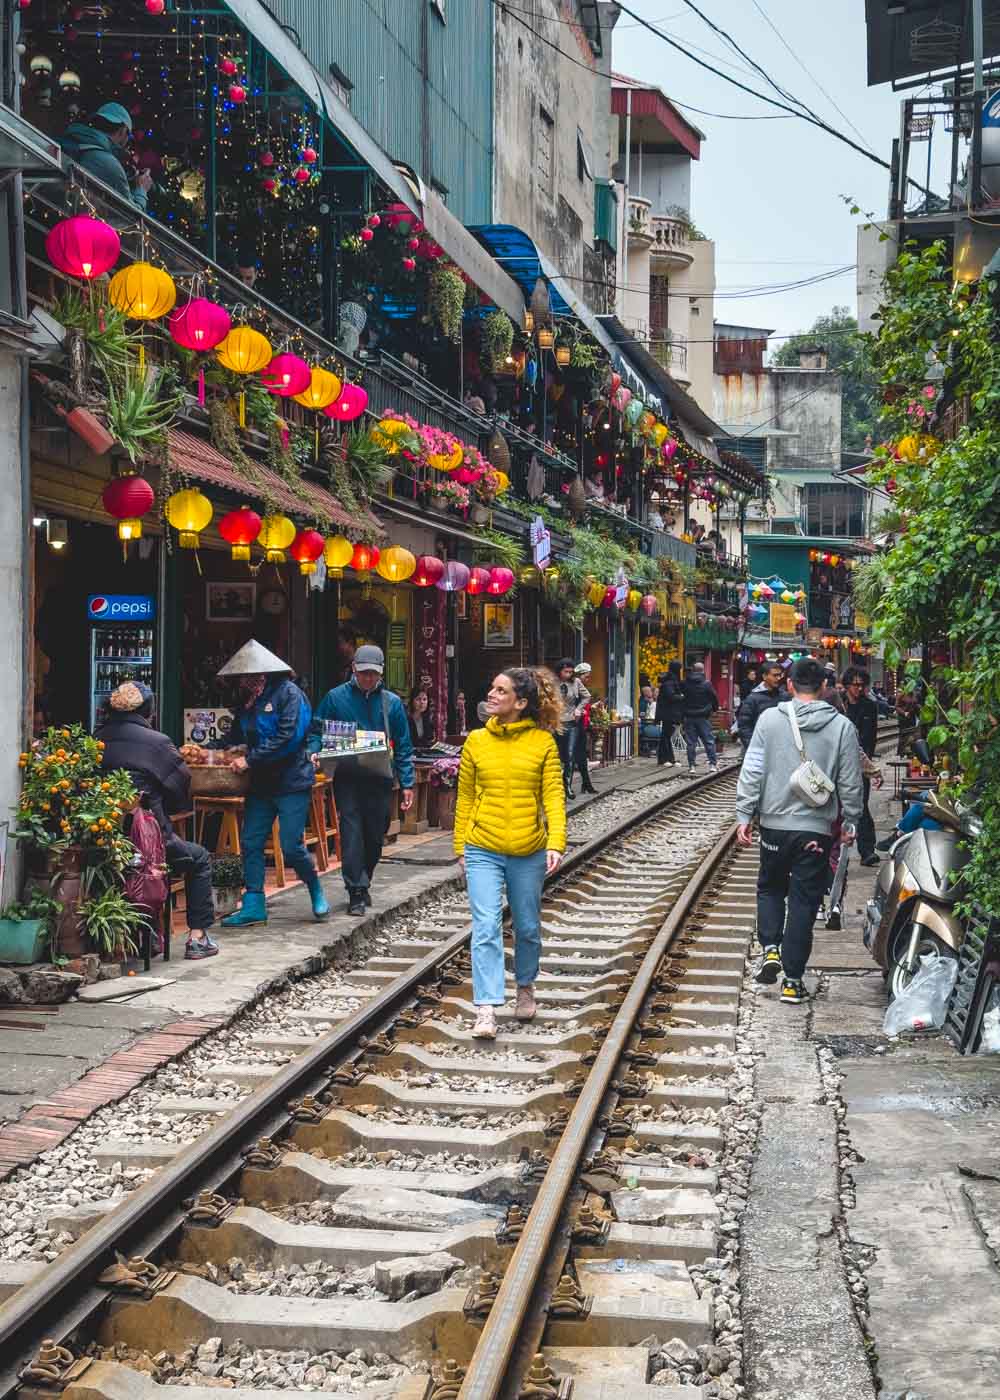 Nina in a yellow puffer jackets walking down the railway of Hanoi Train Street between cafes and lanterns.